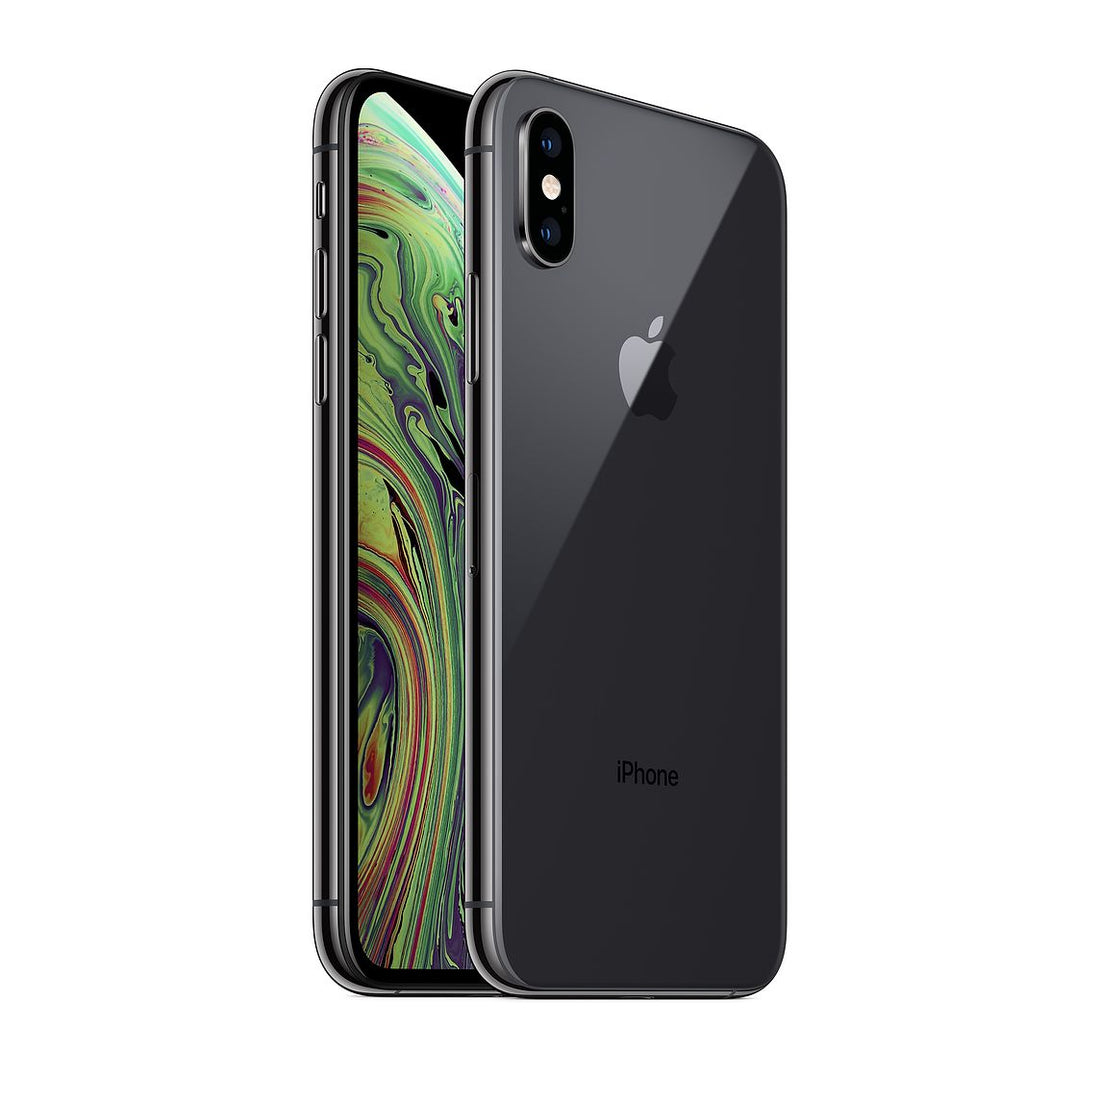 Apple iPhone XS 512GB (T-Mobile) - Space Gray (Used)